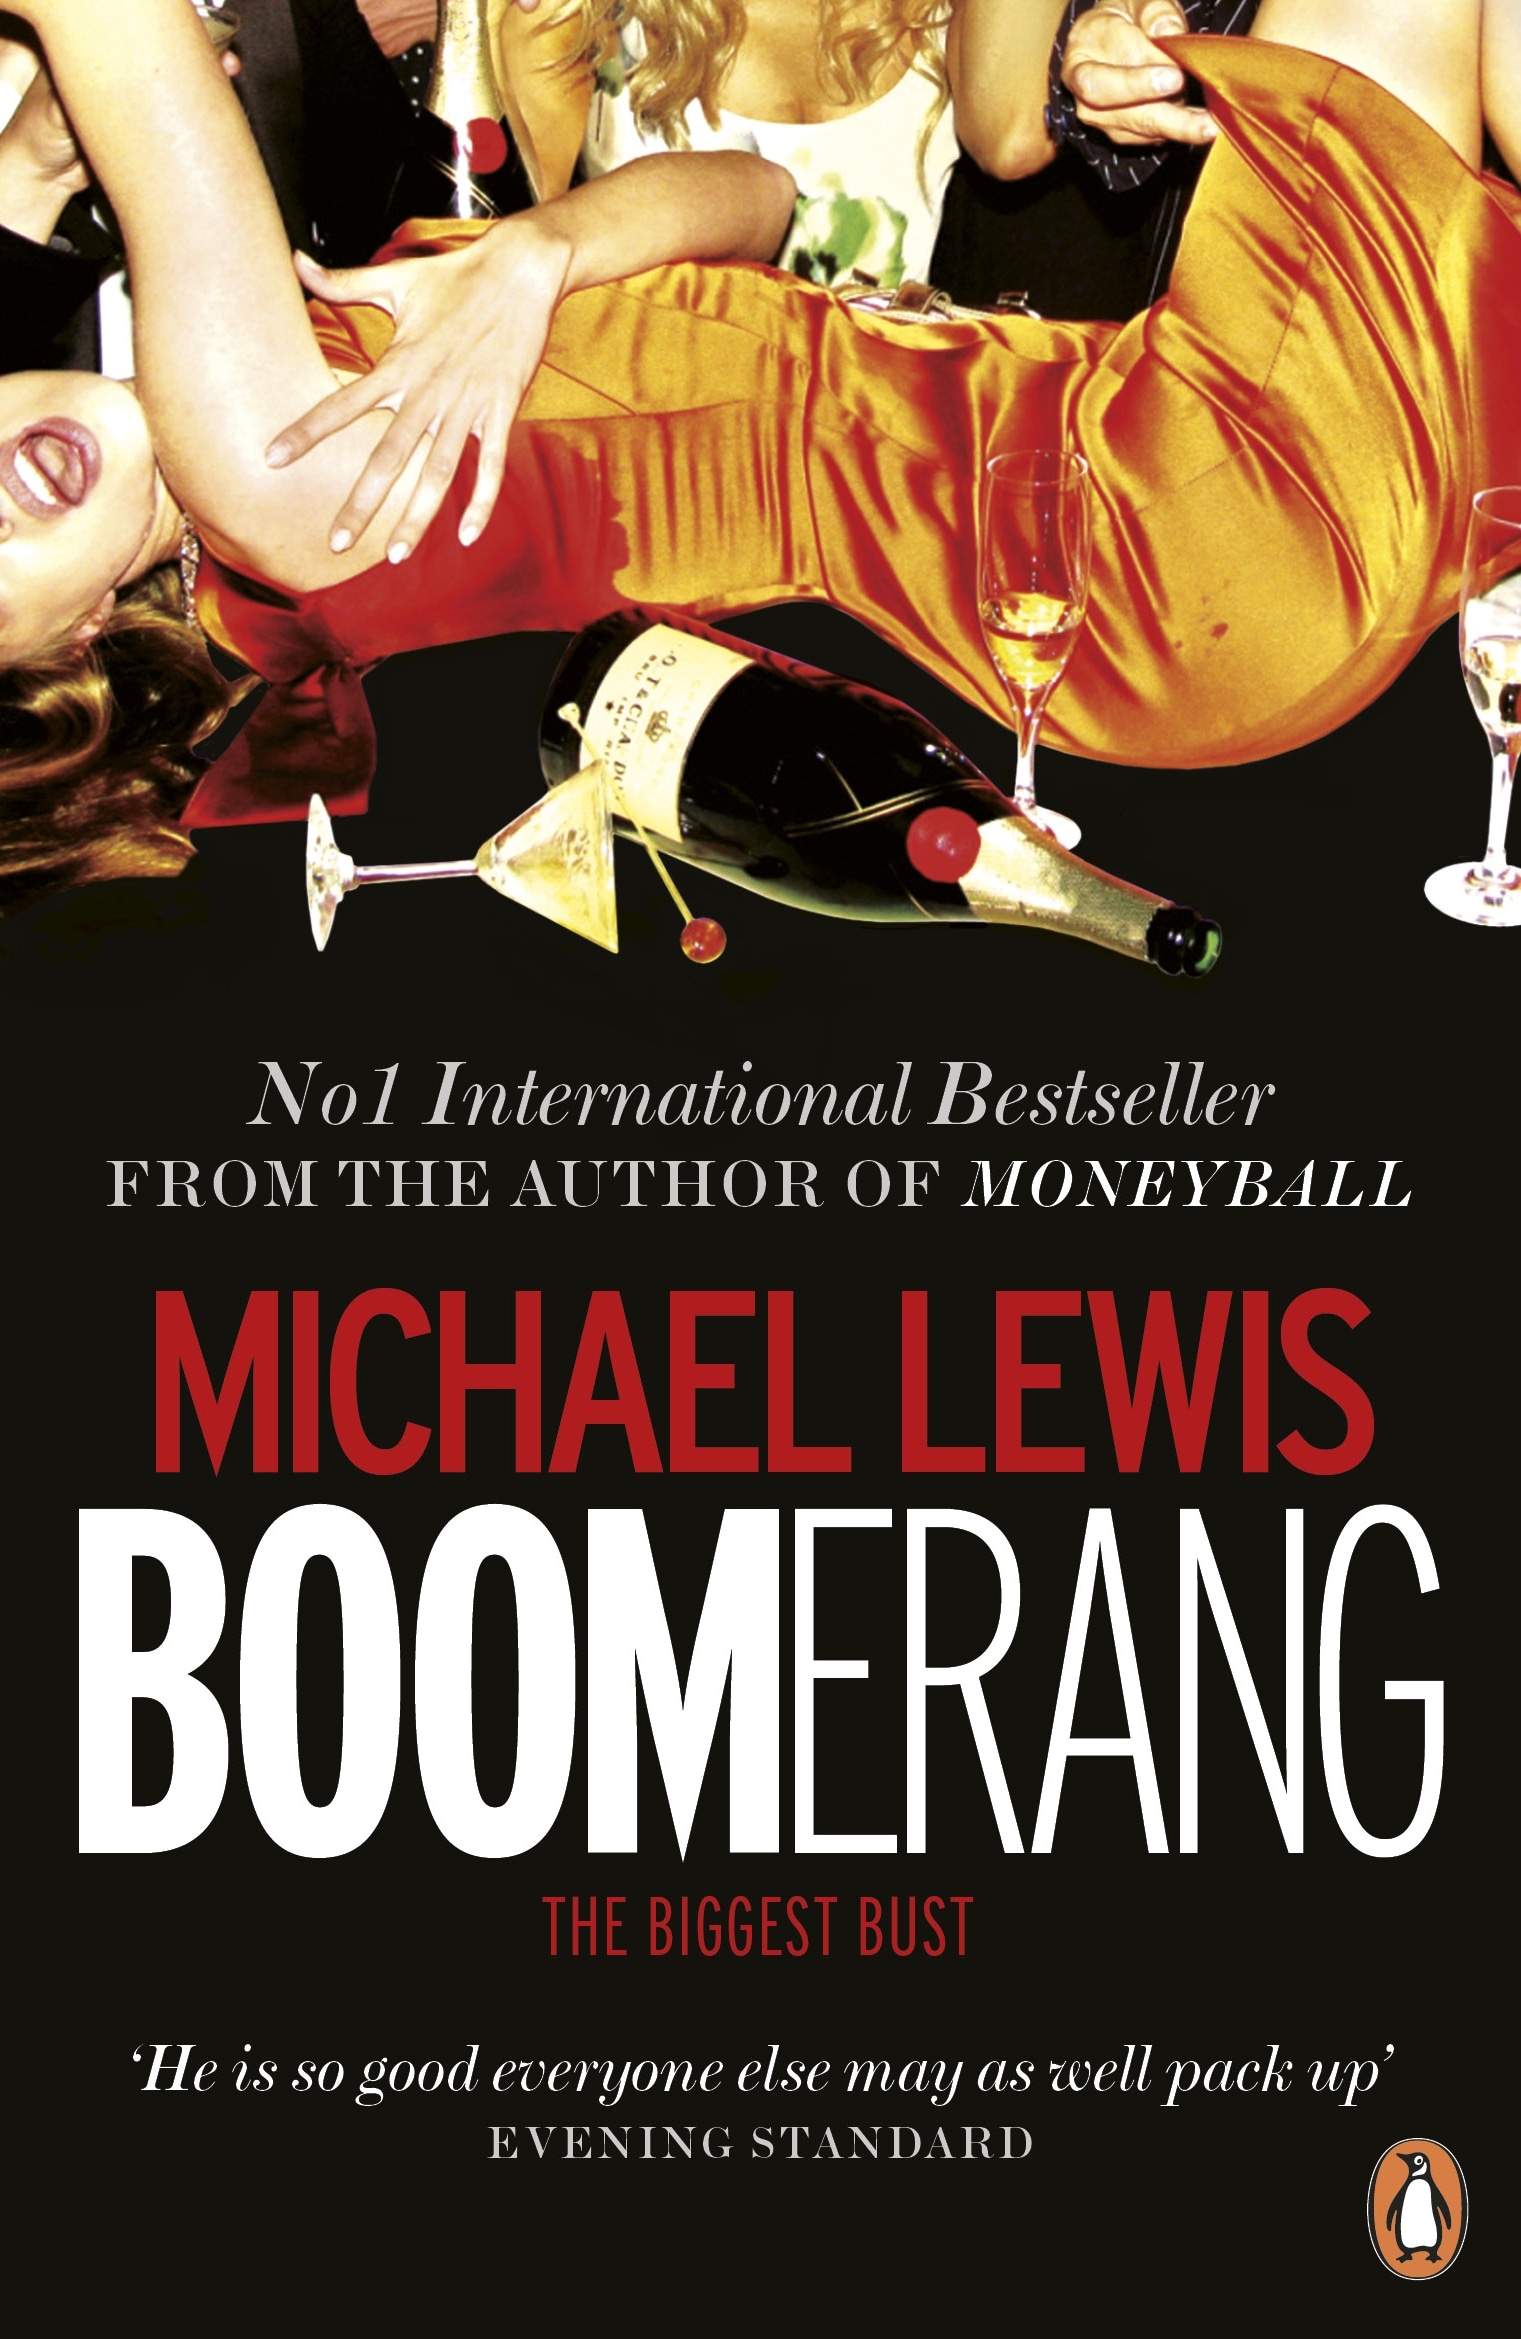 Book “Boomerang” by Michael Lewis